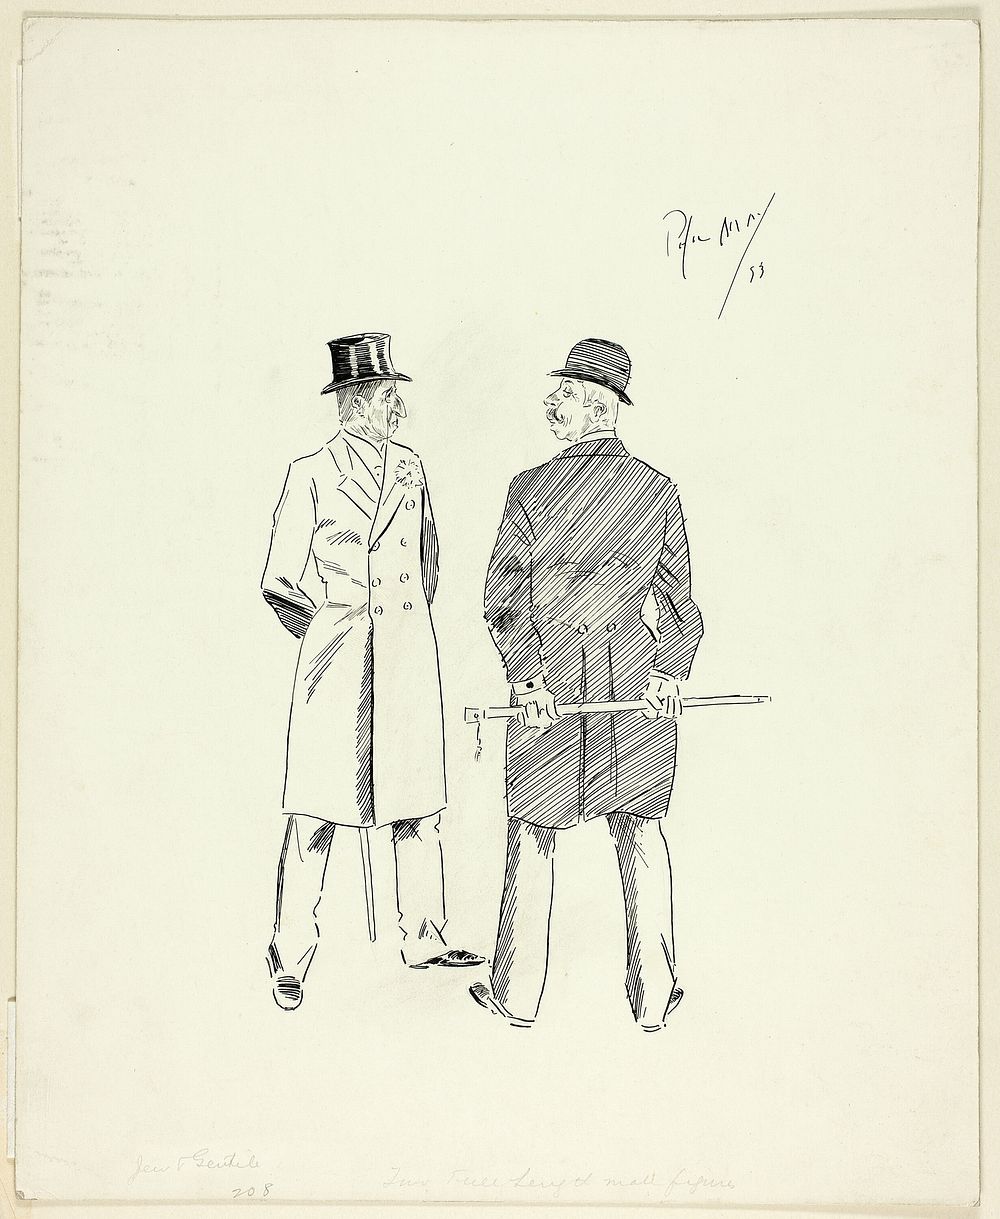 Two Gentlemen with Walking Sticks by Philip William May